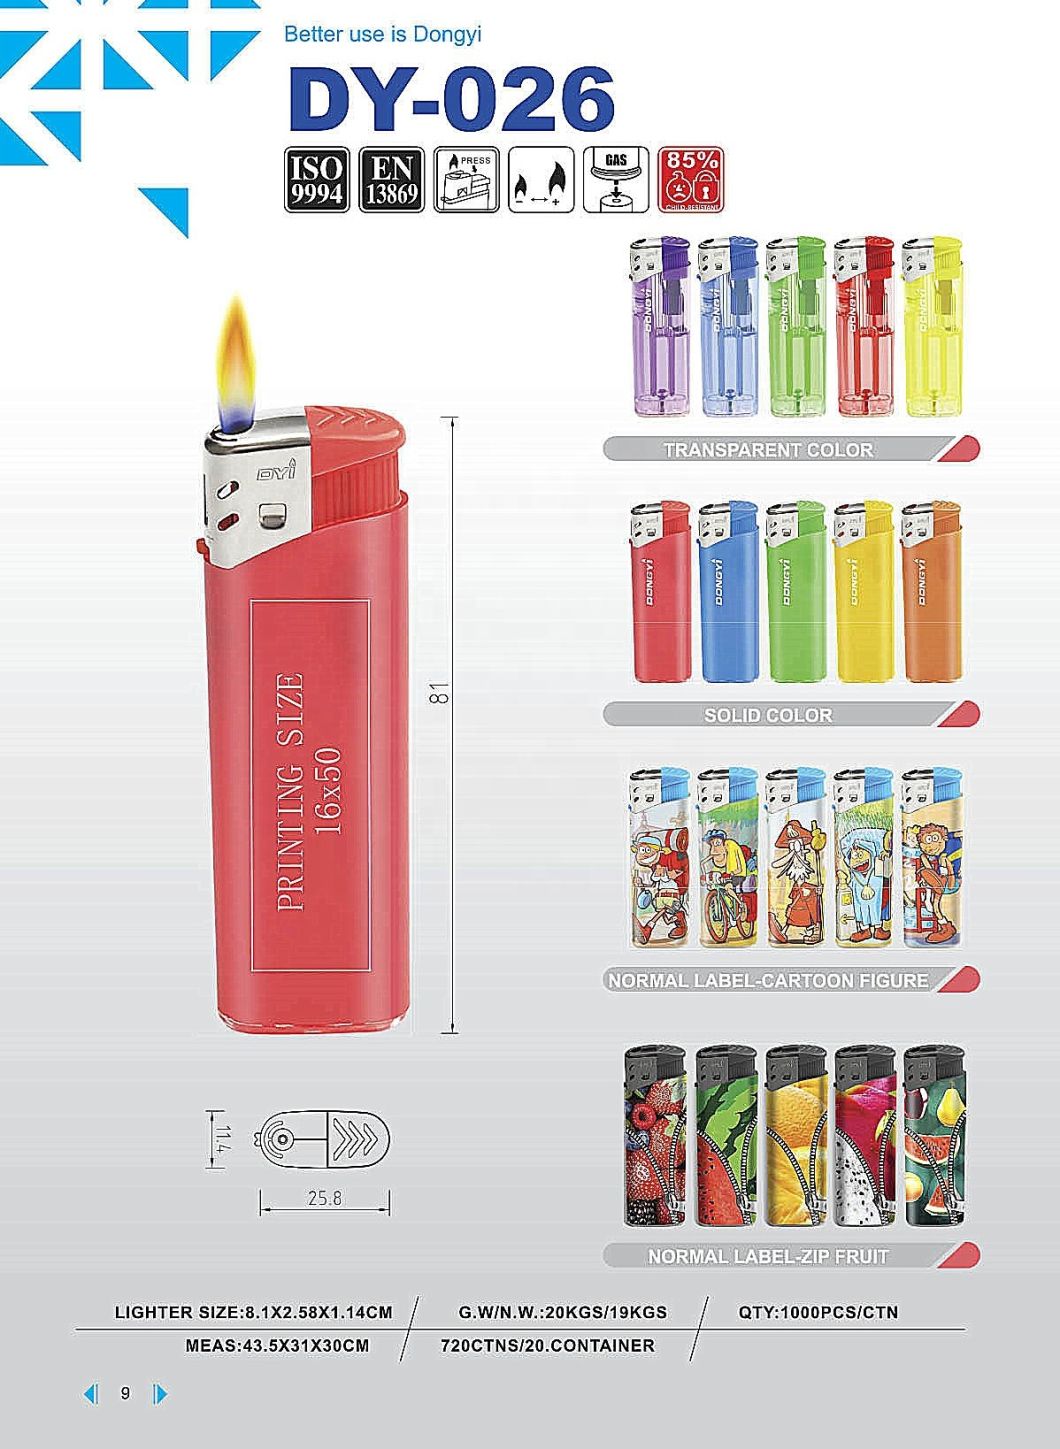 Competitive Price Cigarette Electronic Lighter Pipe